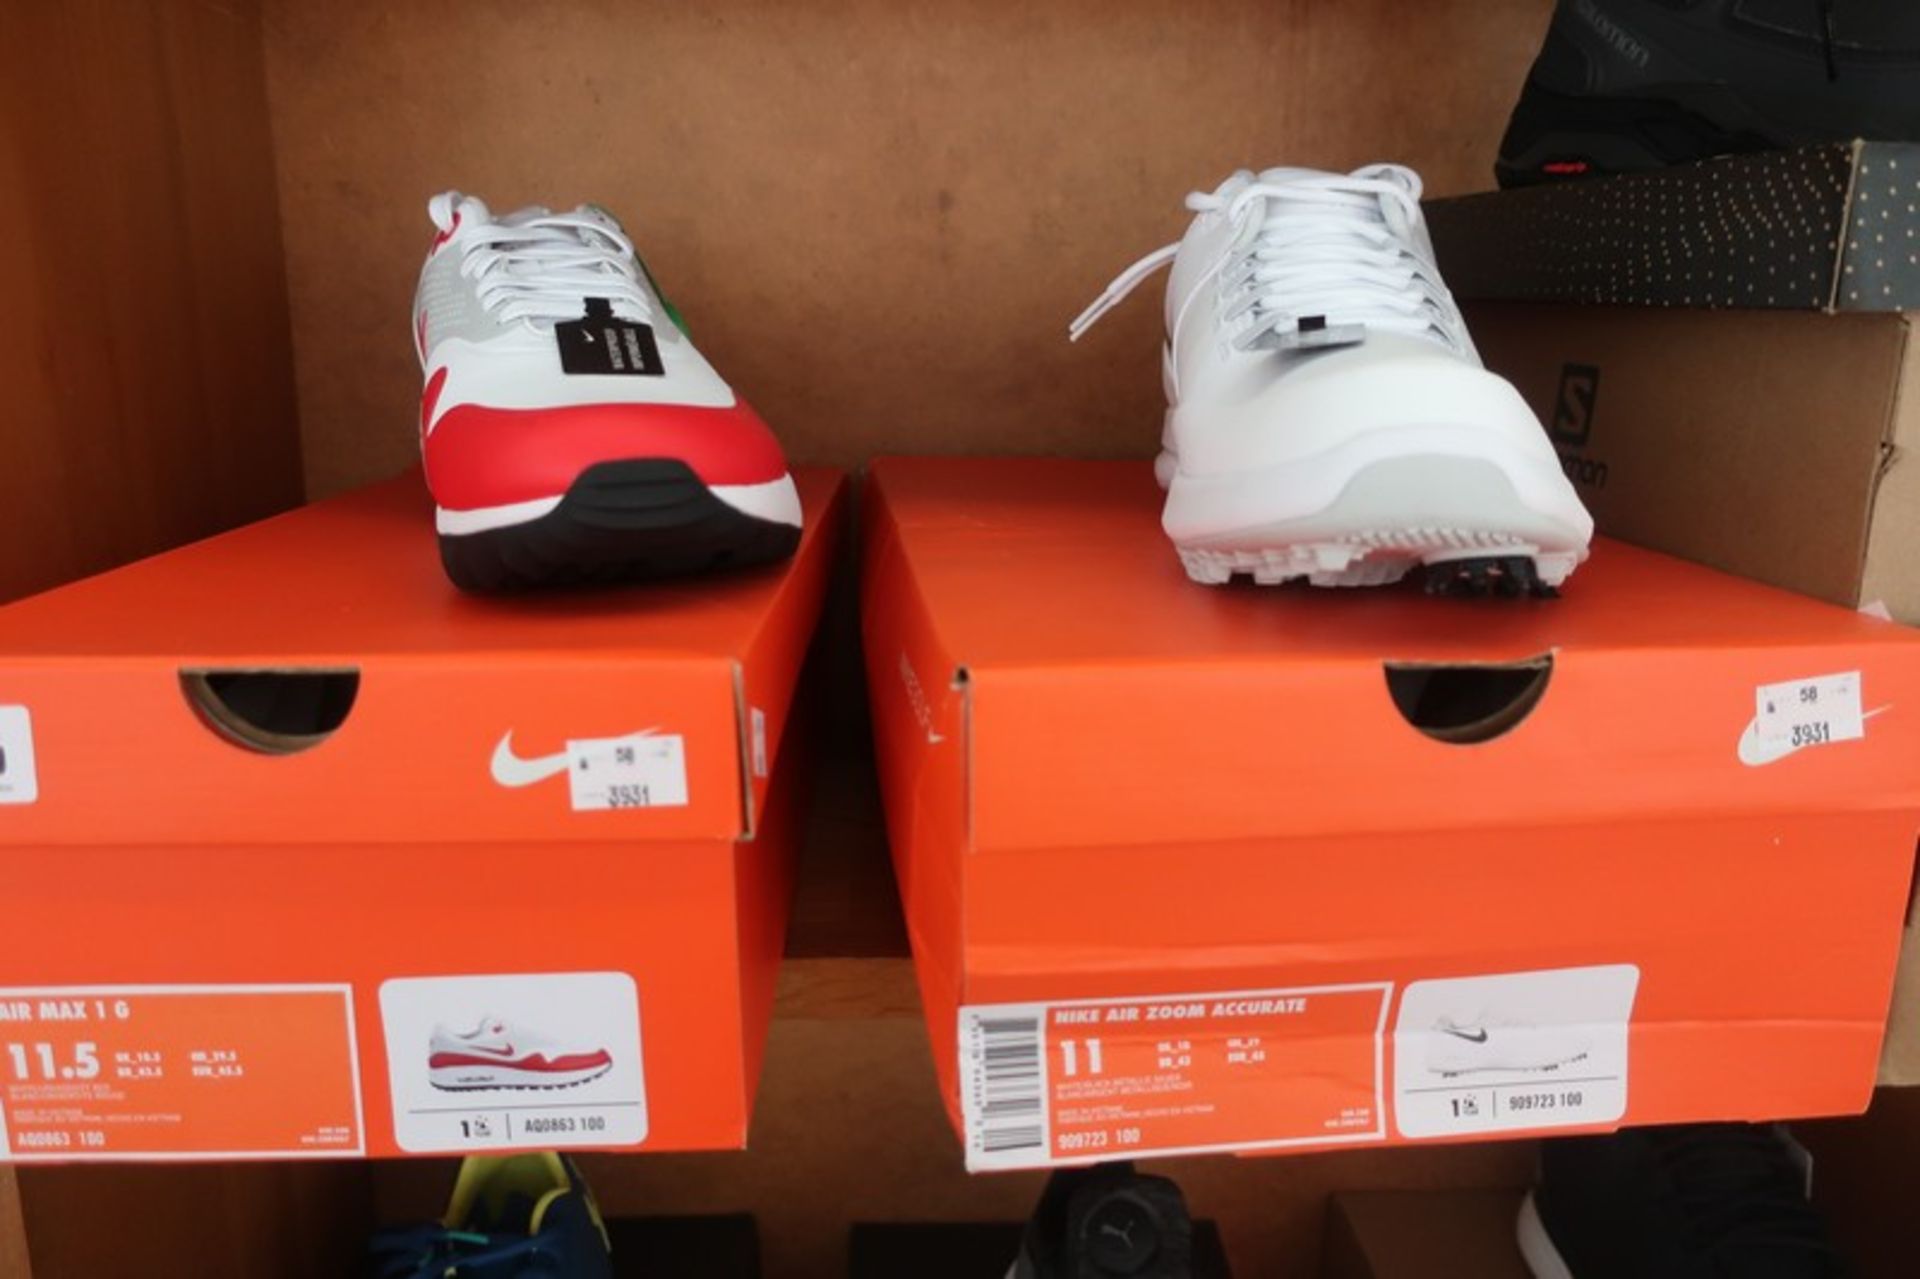 A pair of as new Nike Air Max 1 G golf shoes (UK 10.5) and a pair of Nike Air Zoom Accurate golf